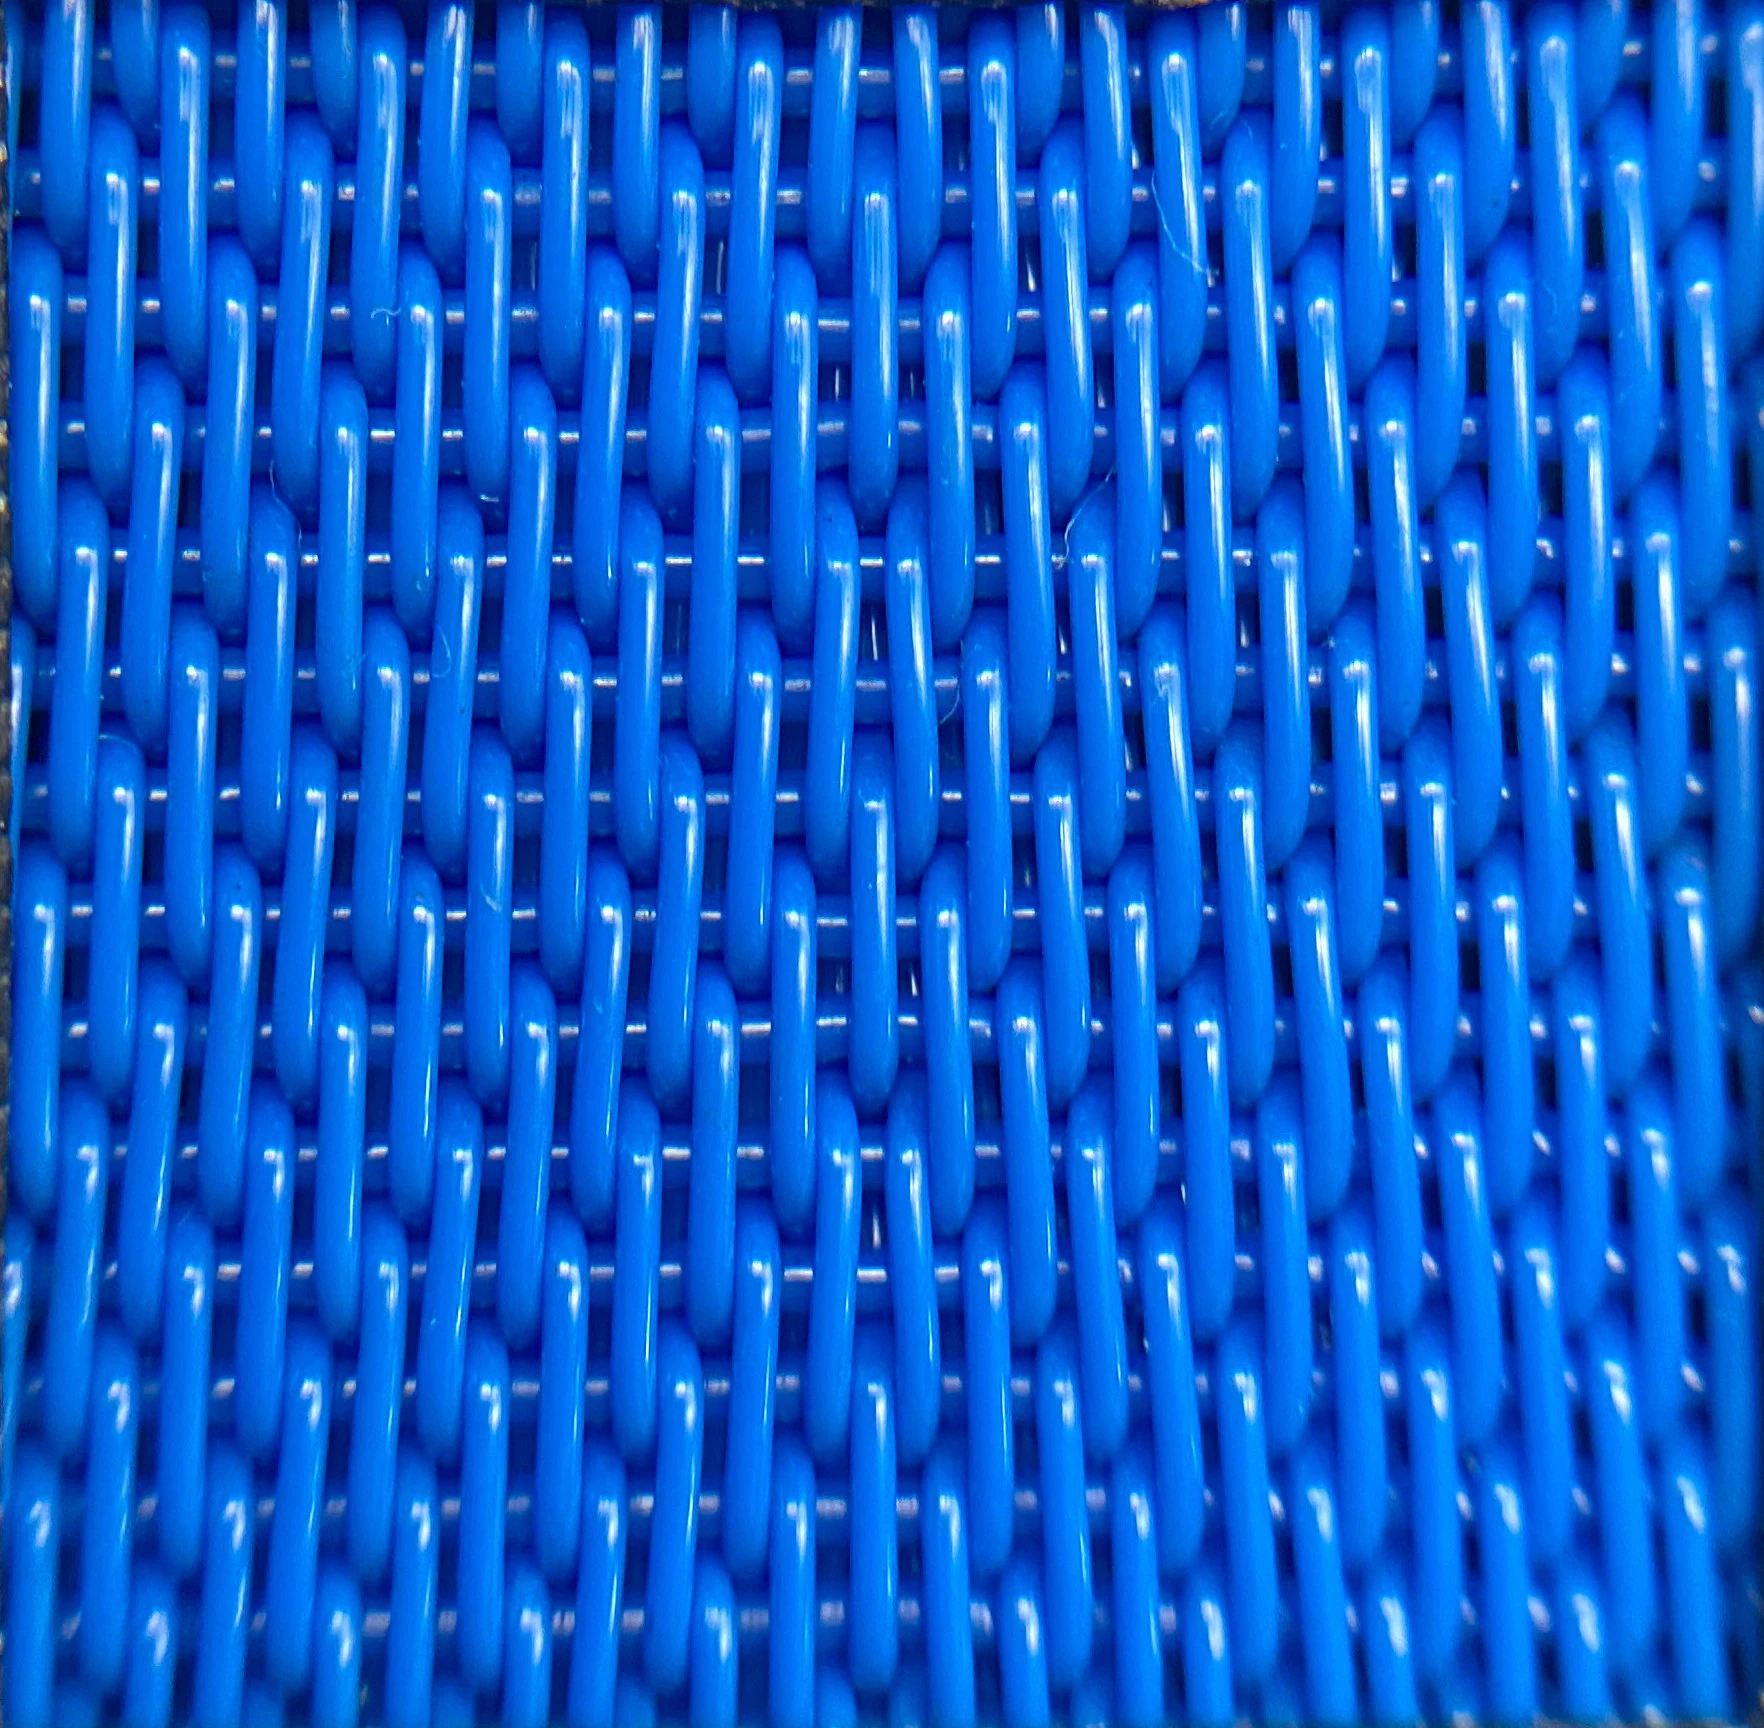 Quality Synthetic Woven Filter Belt Screen Filter Cloth for Vegetable Dewatering